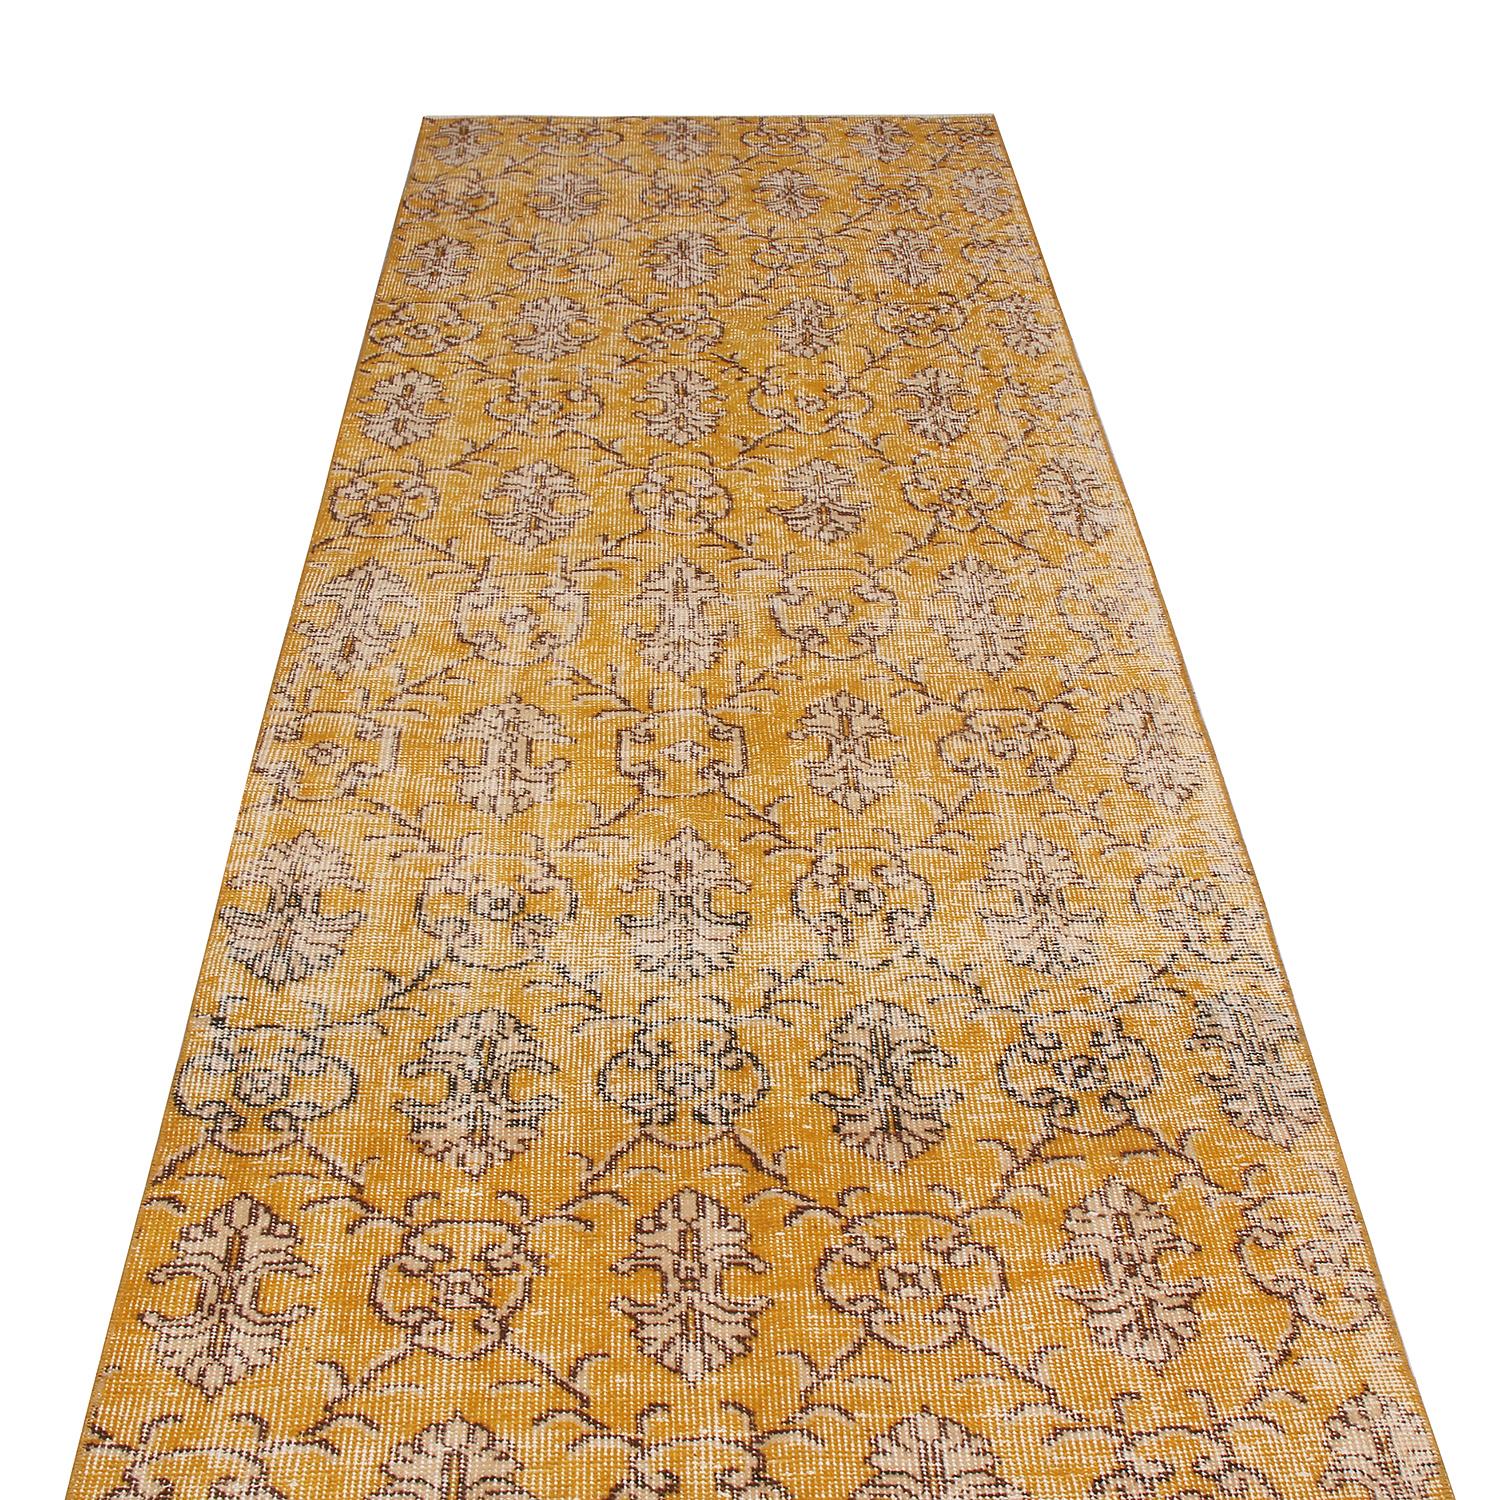 Hand knotted in Turkey originating between 1950-1960, this vintage midcentury wool rug hails from a select series by a very celebrated Turkish designer, enjoying a unique shabby-chic aesthetic. Inspired by Classic oriental traditional styles married